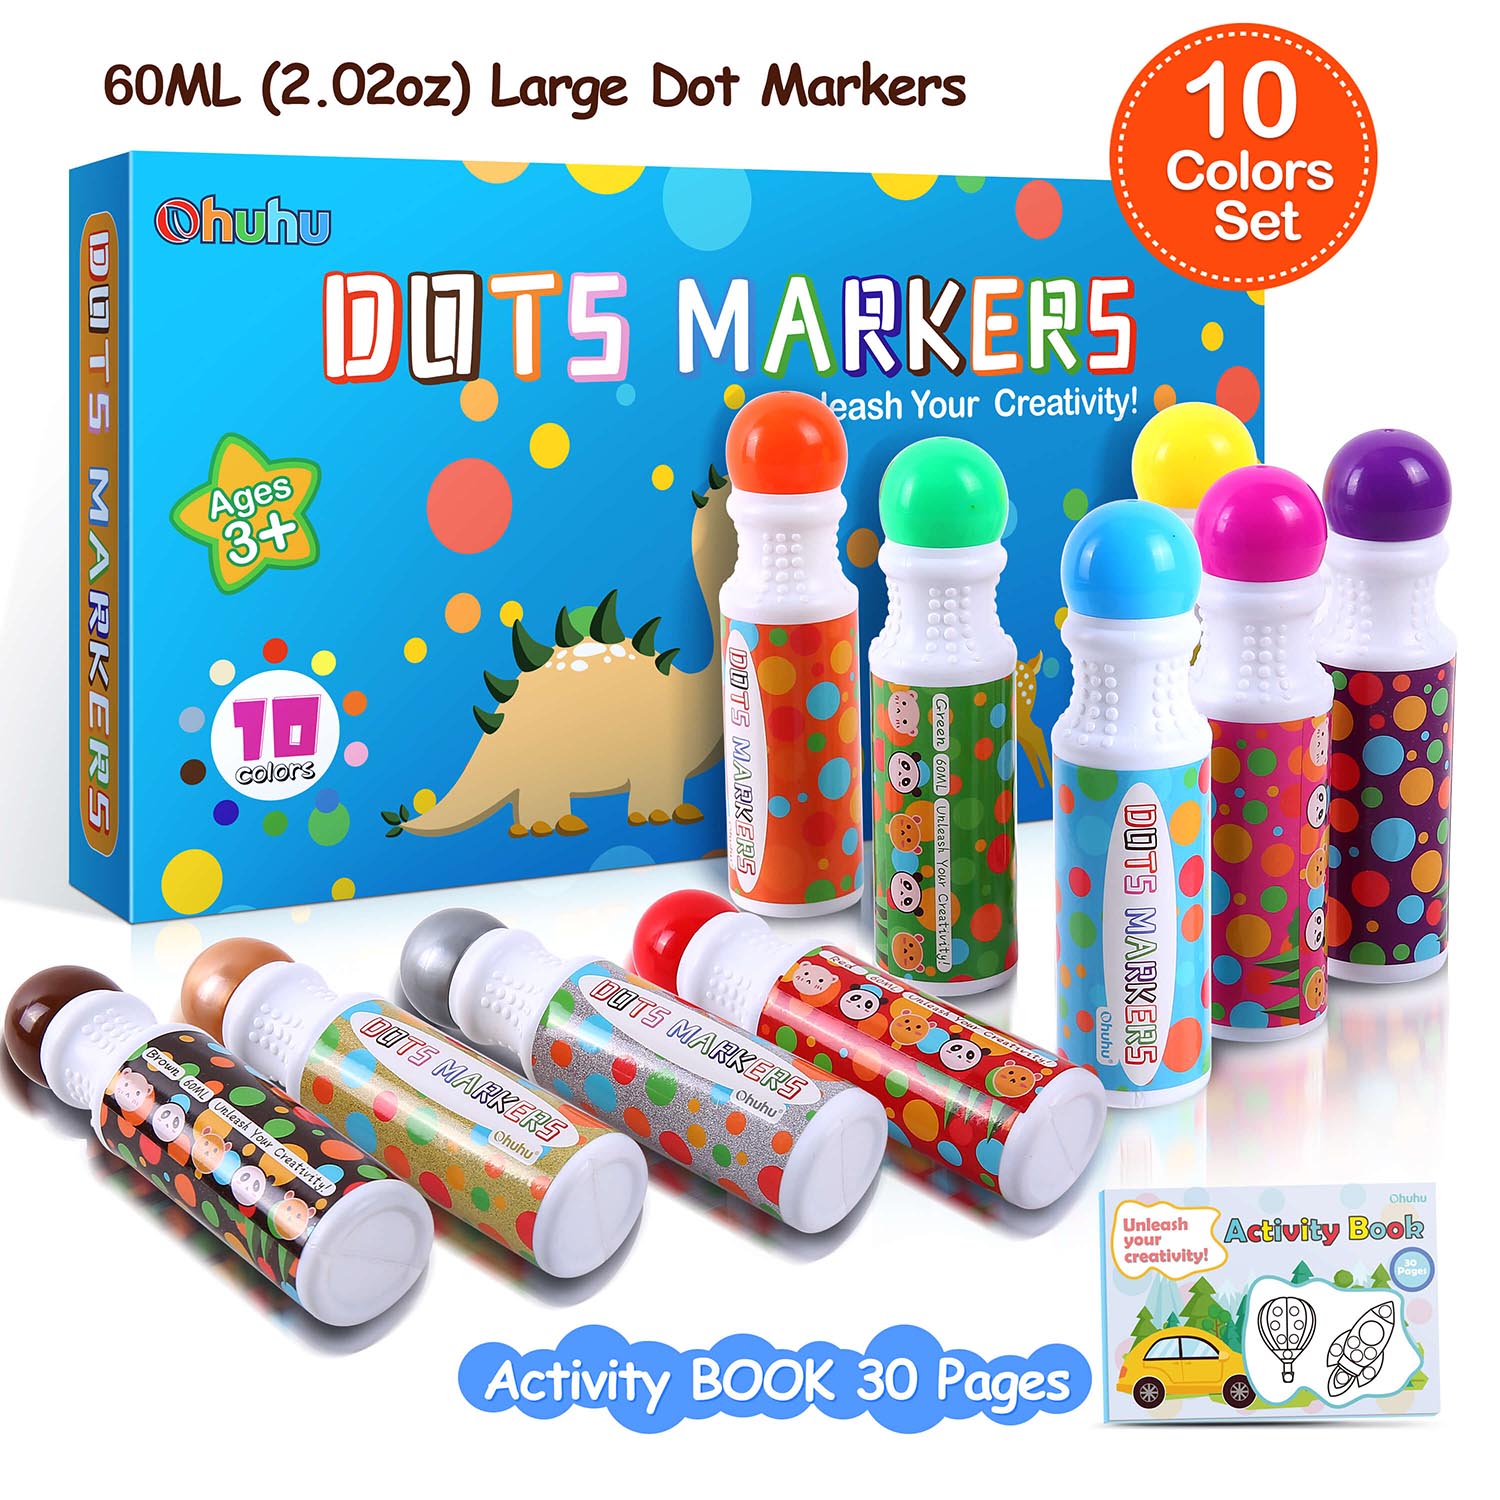 Dot Markers - Set of 36+5